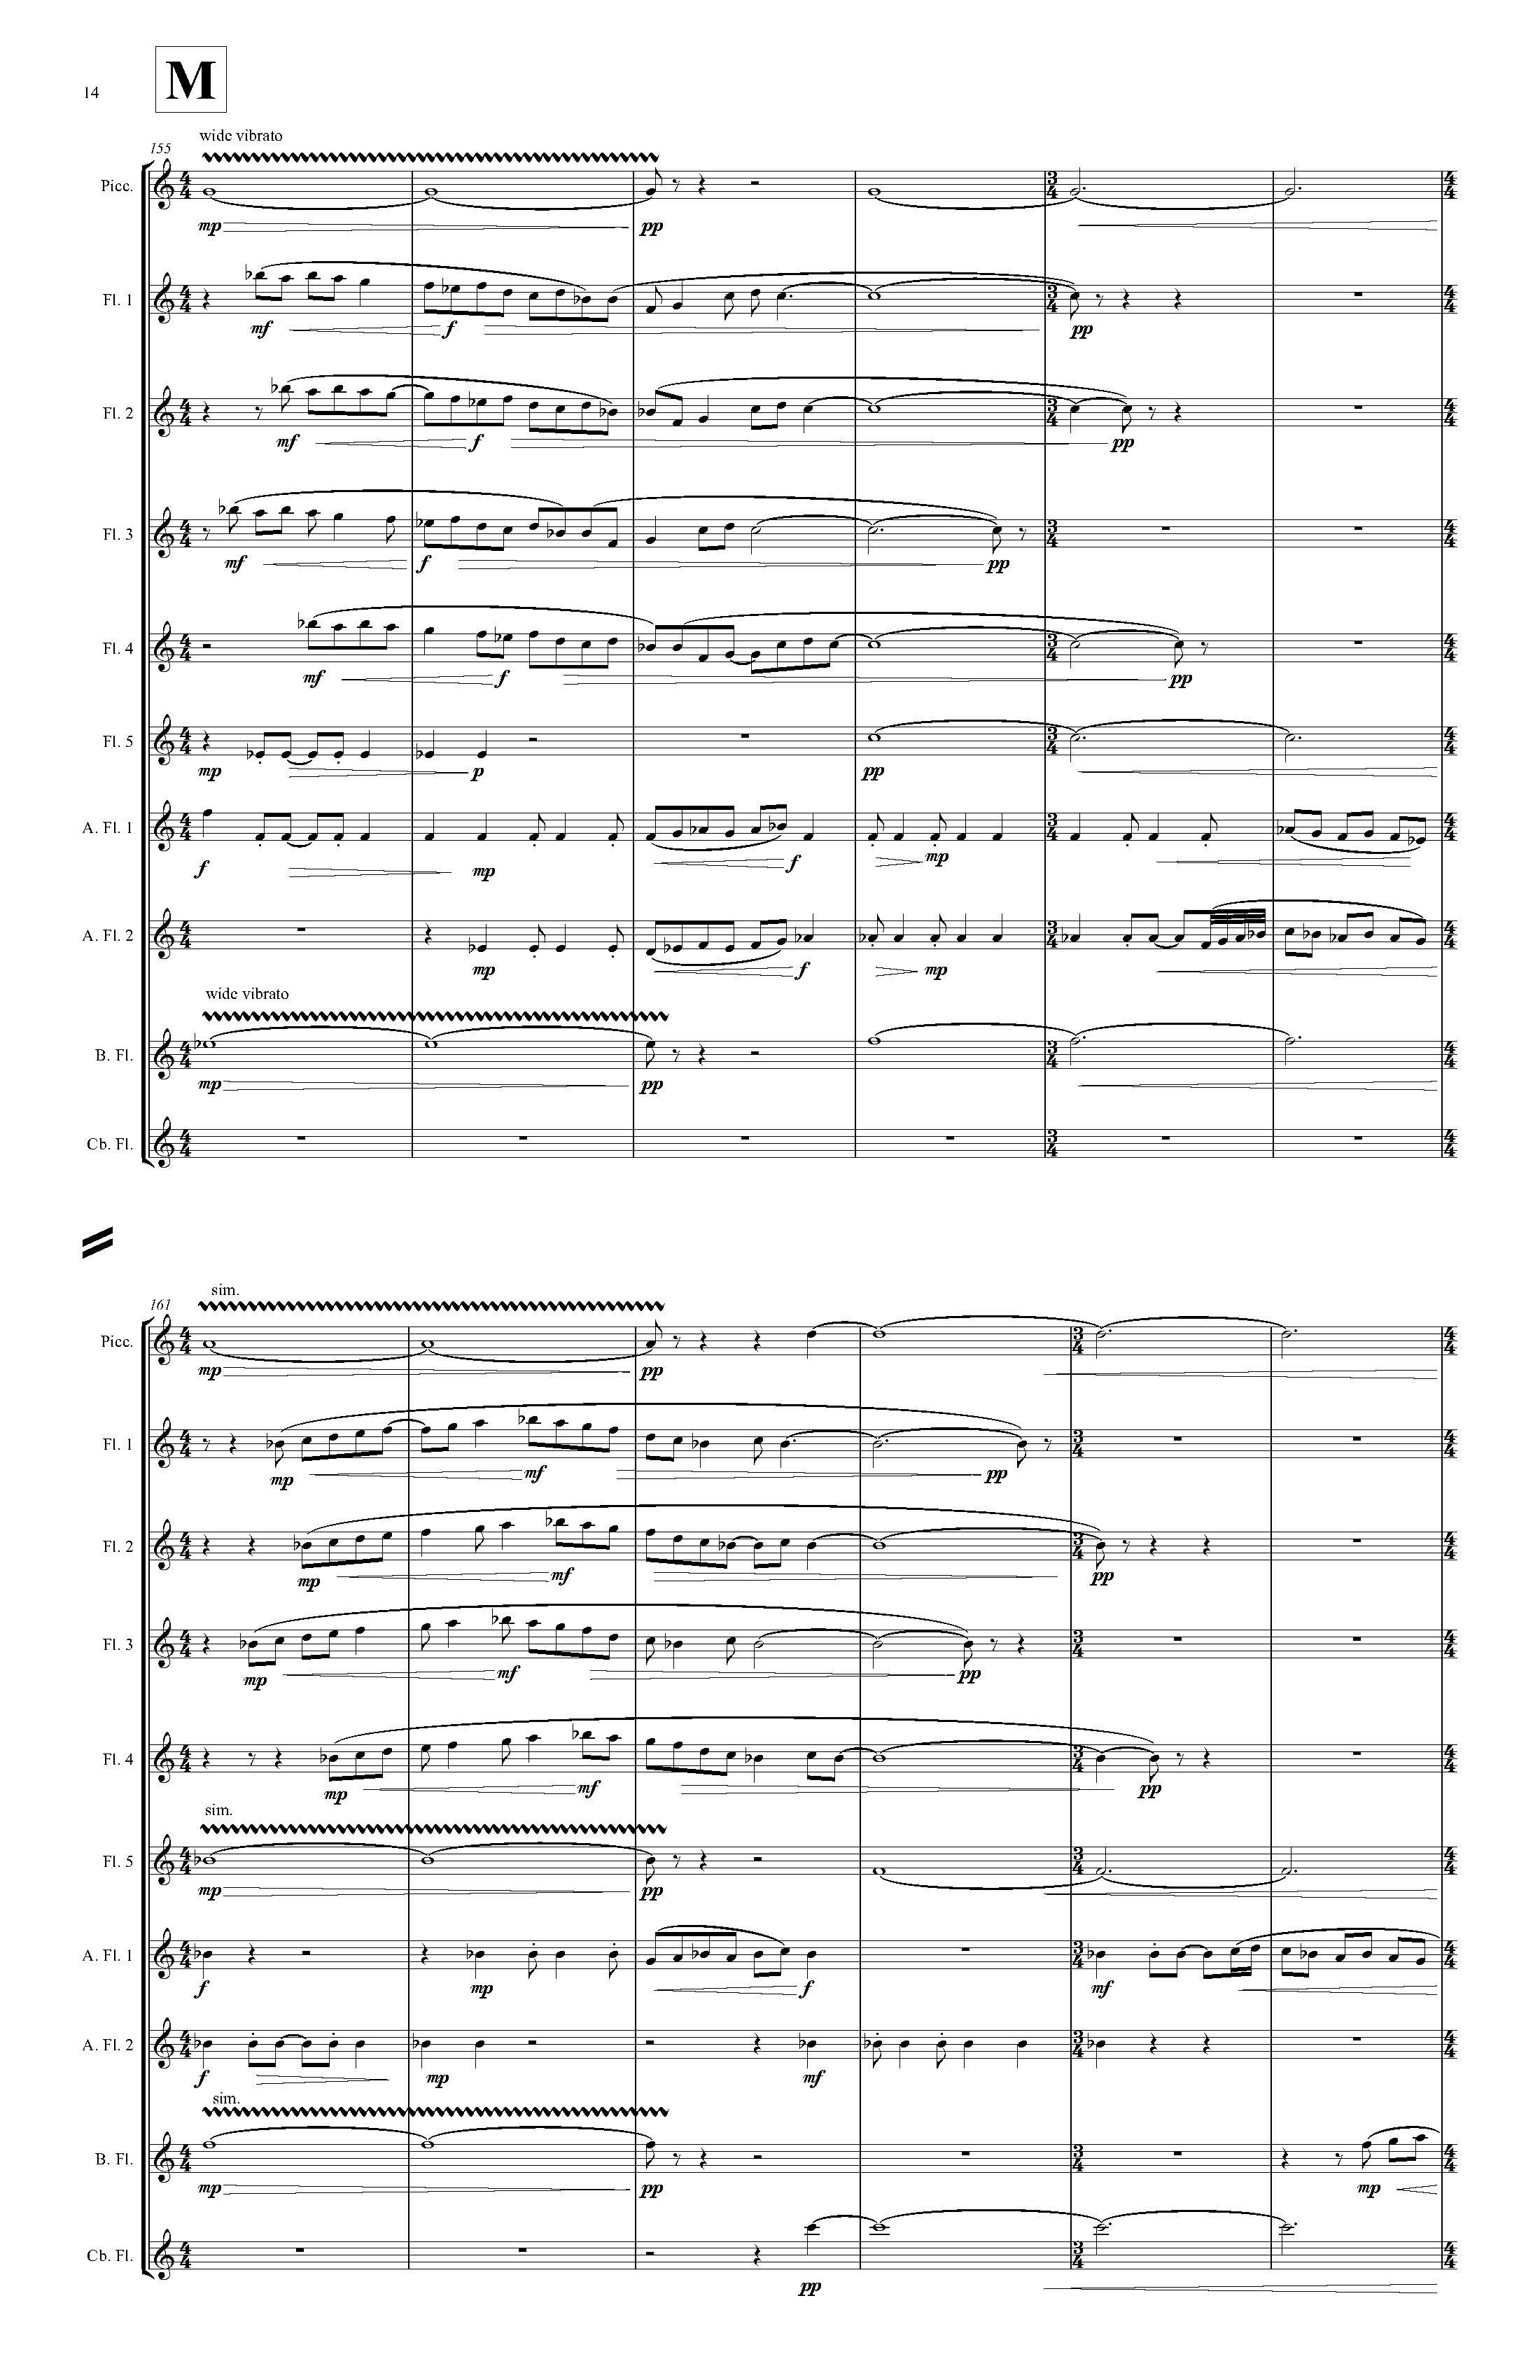 PIPES - Complete Score_Page_20.jpg